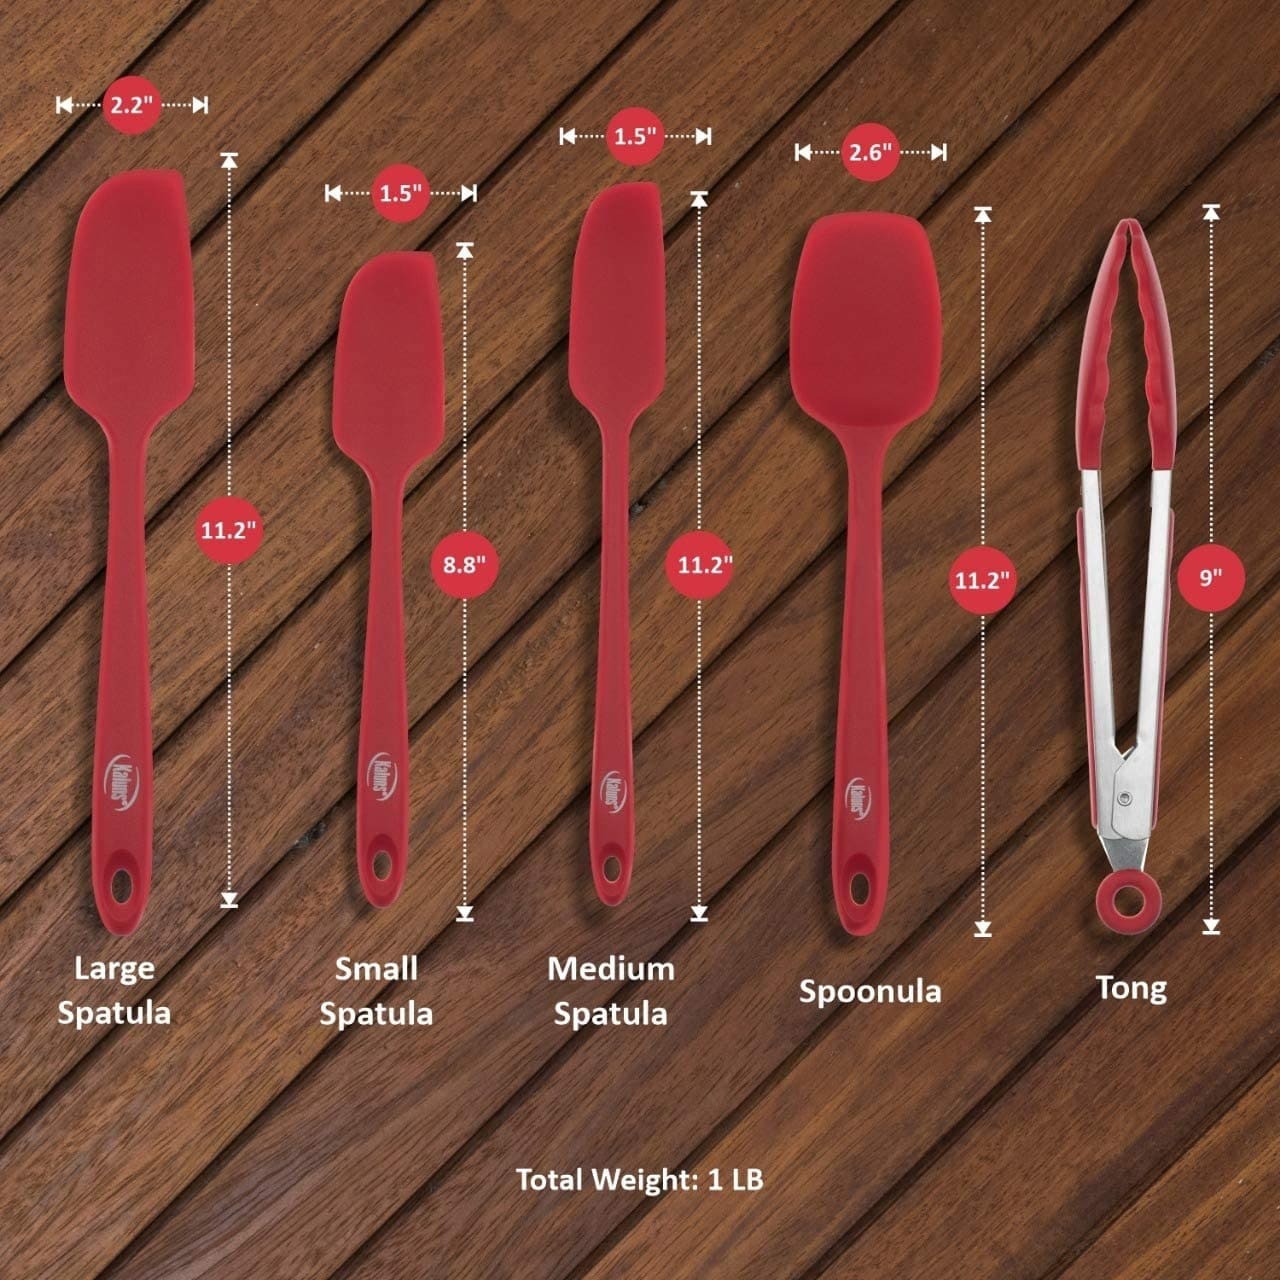 https://ak1.ostkcdn.com/images/products/is/images/direct/12350bb9aef0a92f2c73f637c09506300097a47c/Silicone-Spatula-set%2C-Non-stick-Heat-resistant%2C-5-piece.jpg